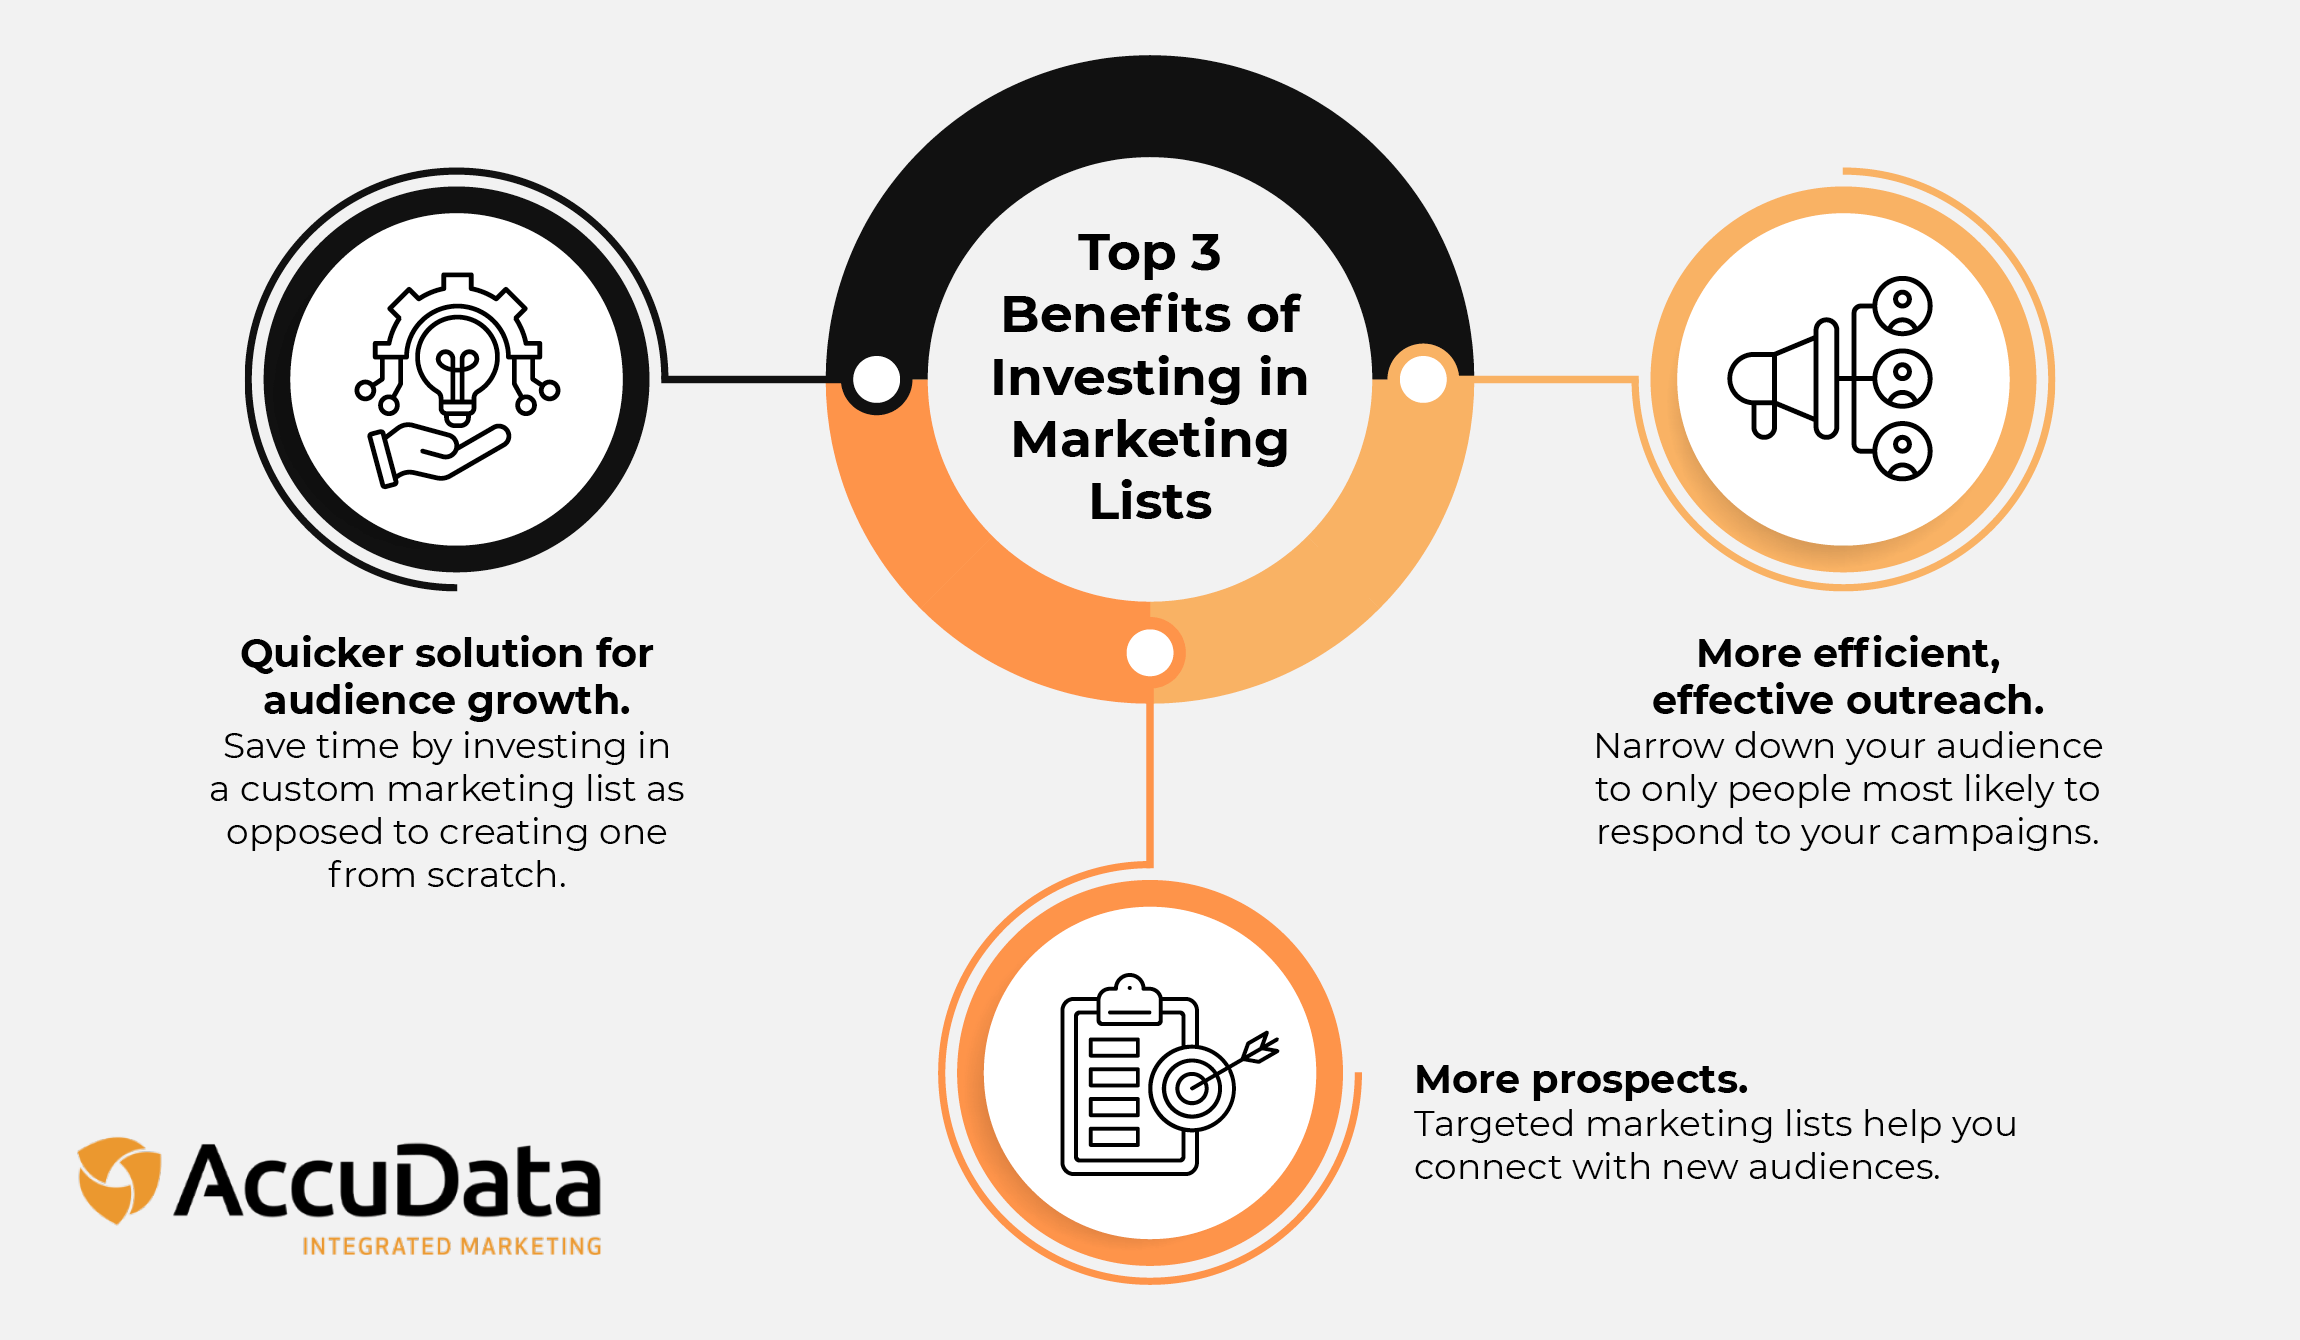 This image describes the top three benefits of purchasing marketing lists.